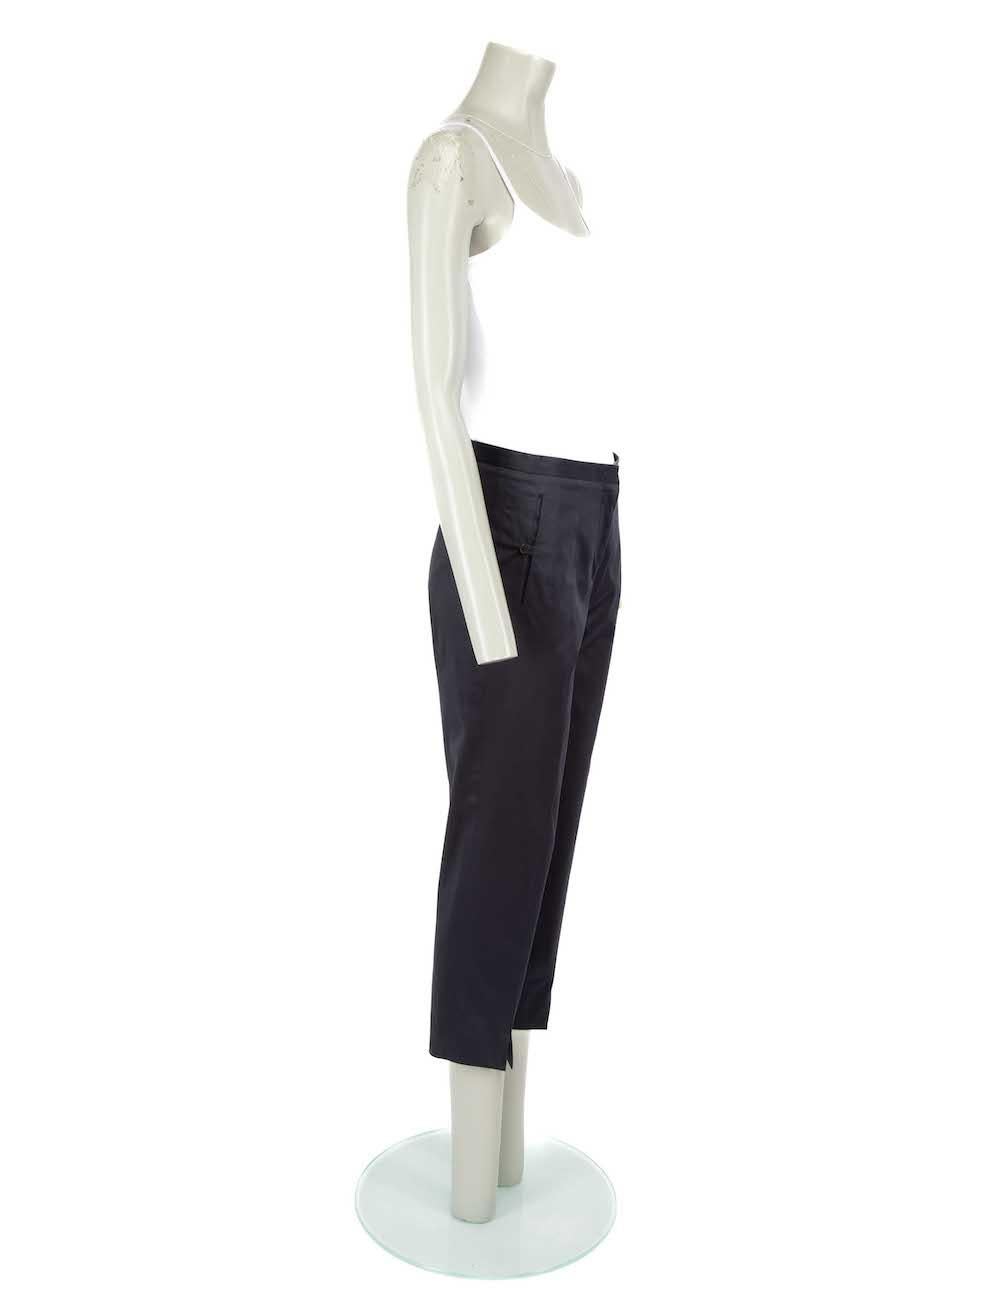 CONDITION is Very good. Hardly any visible wear to trousers is evident on this used Jil Sander designer resale item.
 
 Details
 Navy
 Cotton
 Slim fit trousers
 Mid rise
 Cropped length
 Front zip closure with clasp and button
 2x Front side